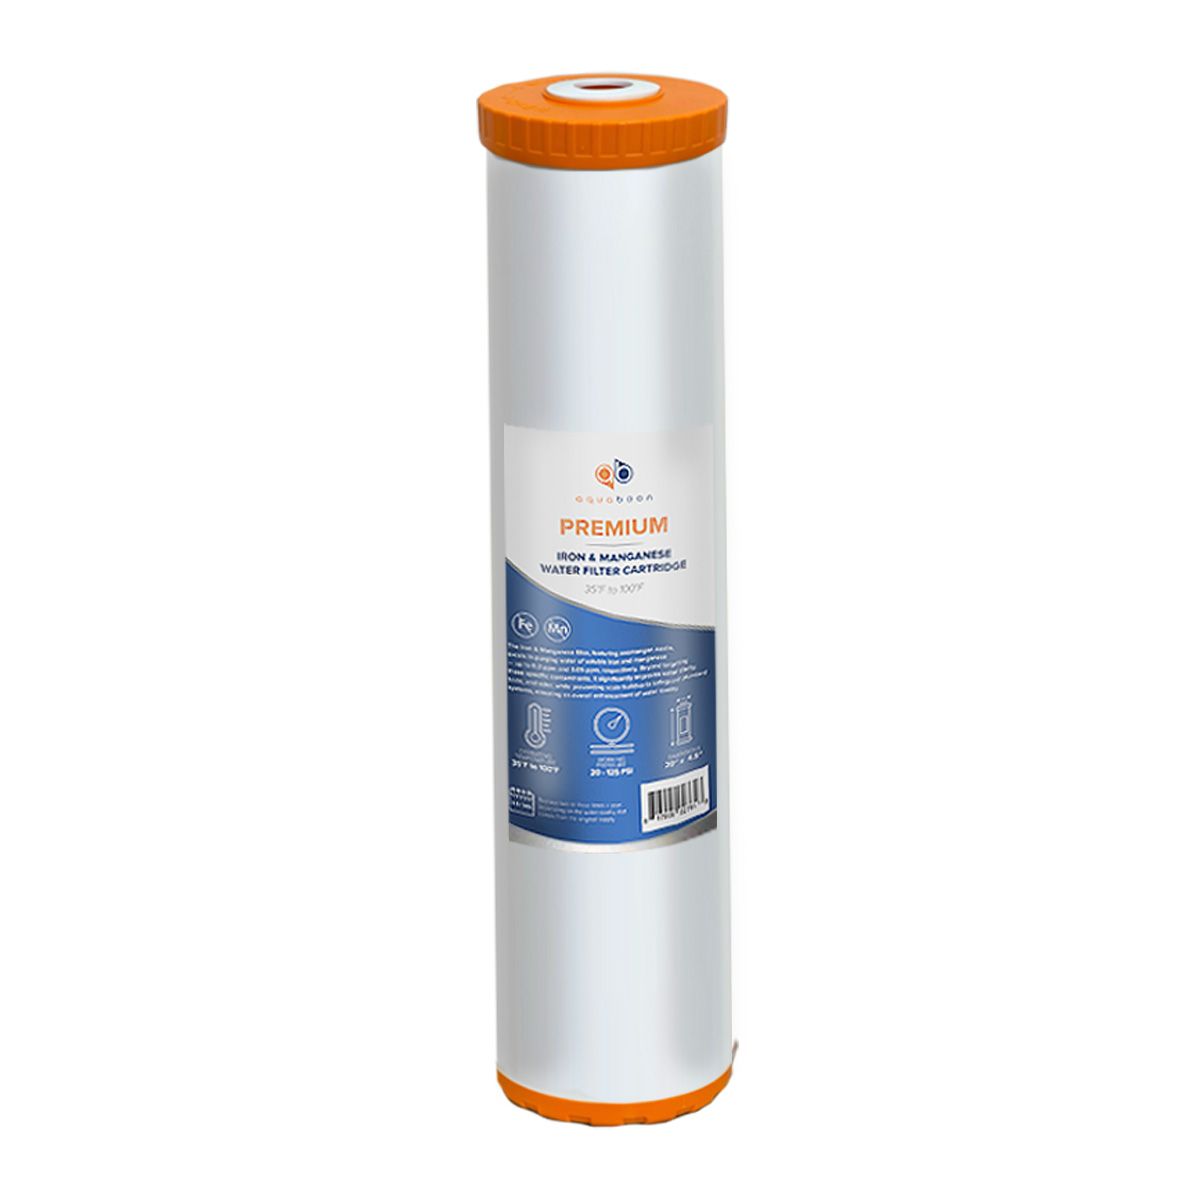 Whole House 20 x 4.5 Inch. Big Blue Iron and Manganese Water Filter Cartridge